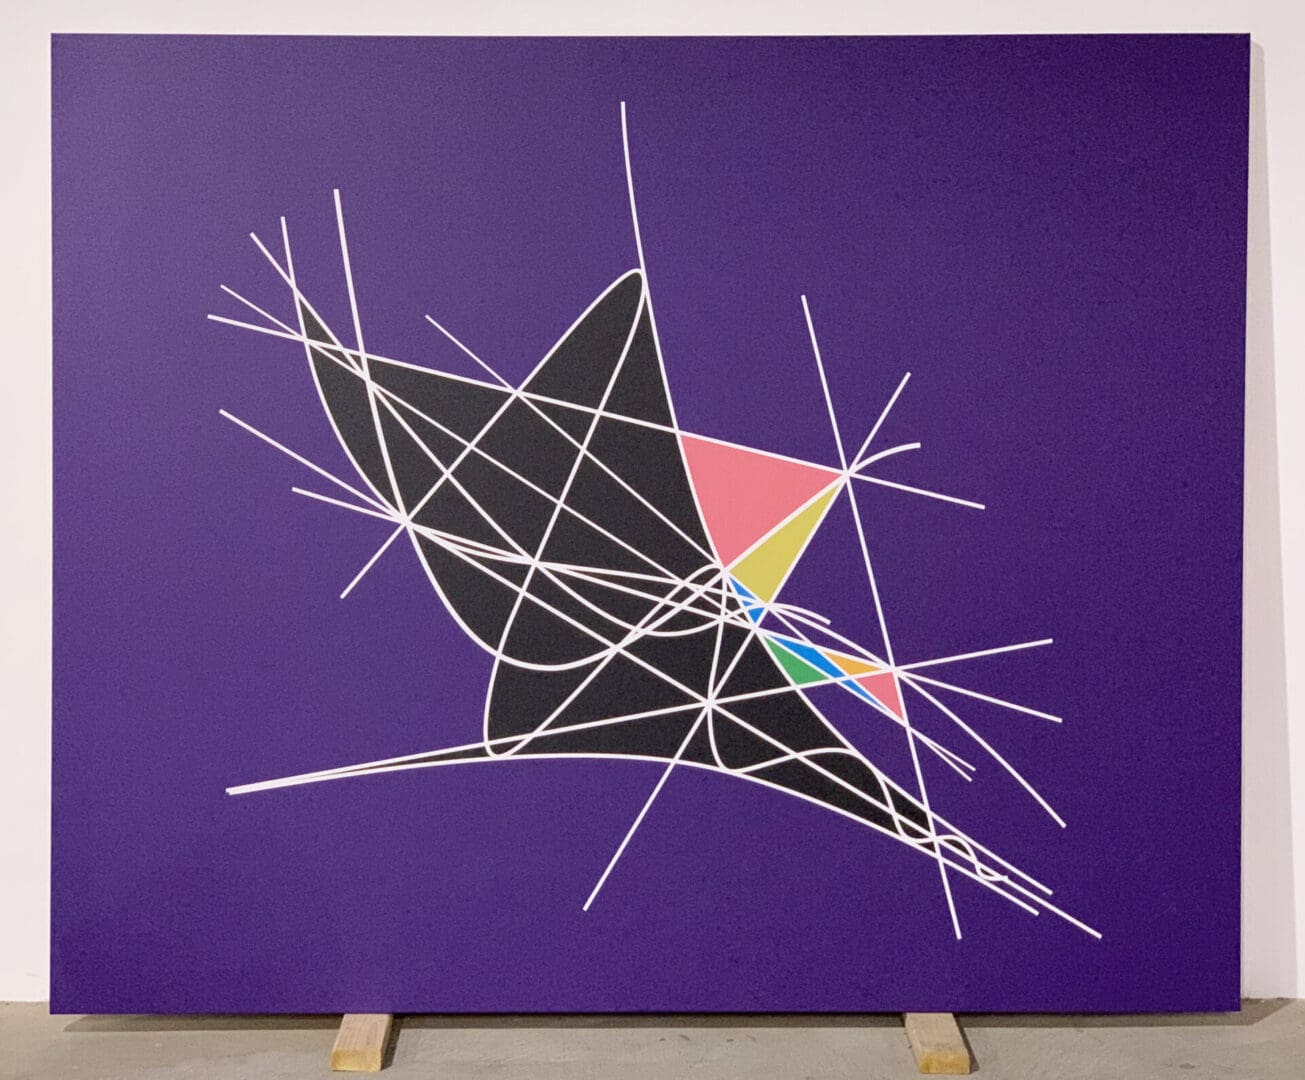 Clifford Singer. Algebraic Relativization of Geometry. Archival Ink on Canvas. 72 x 80 in. 2022